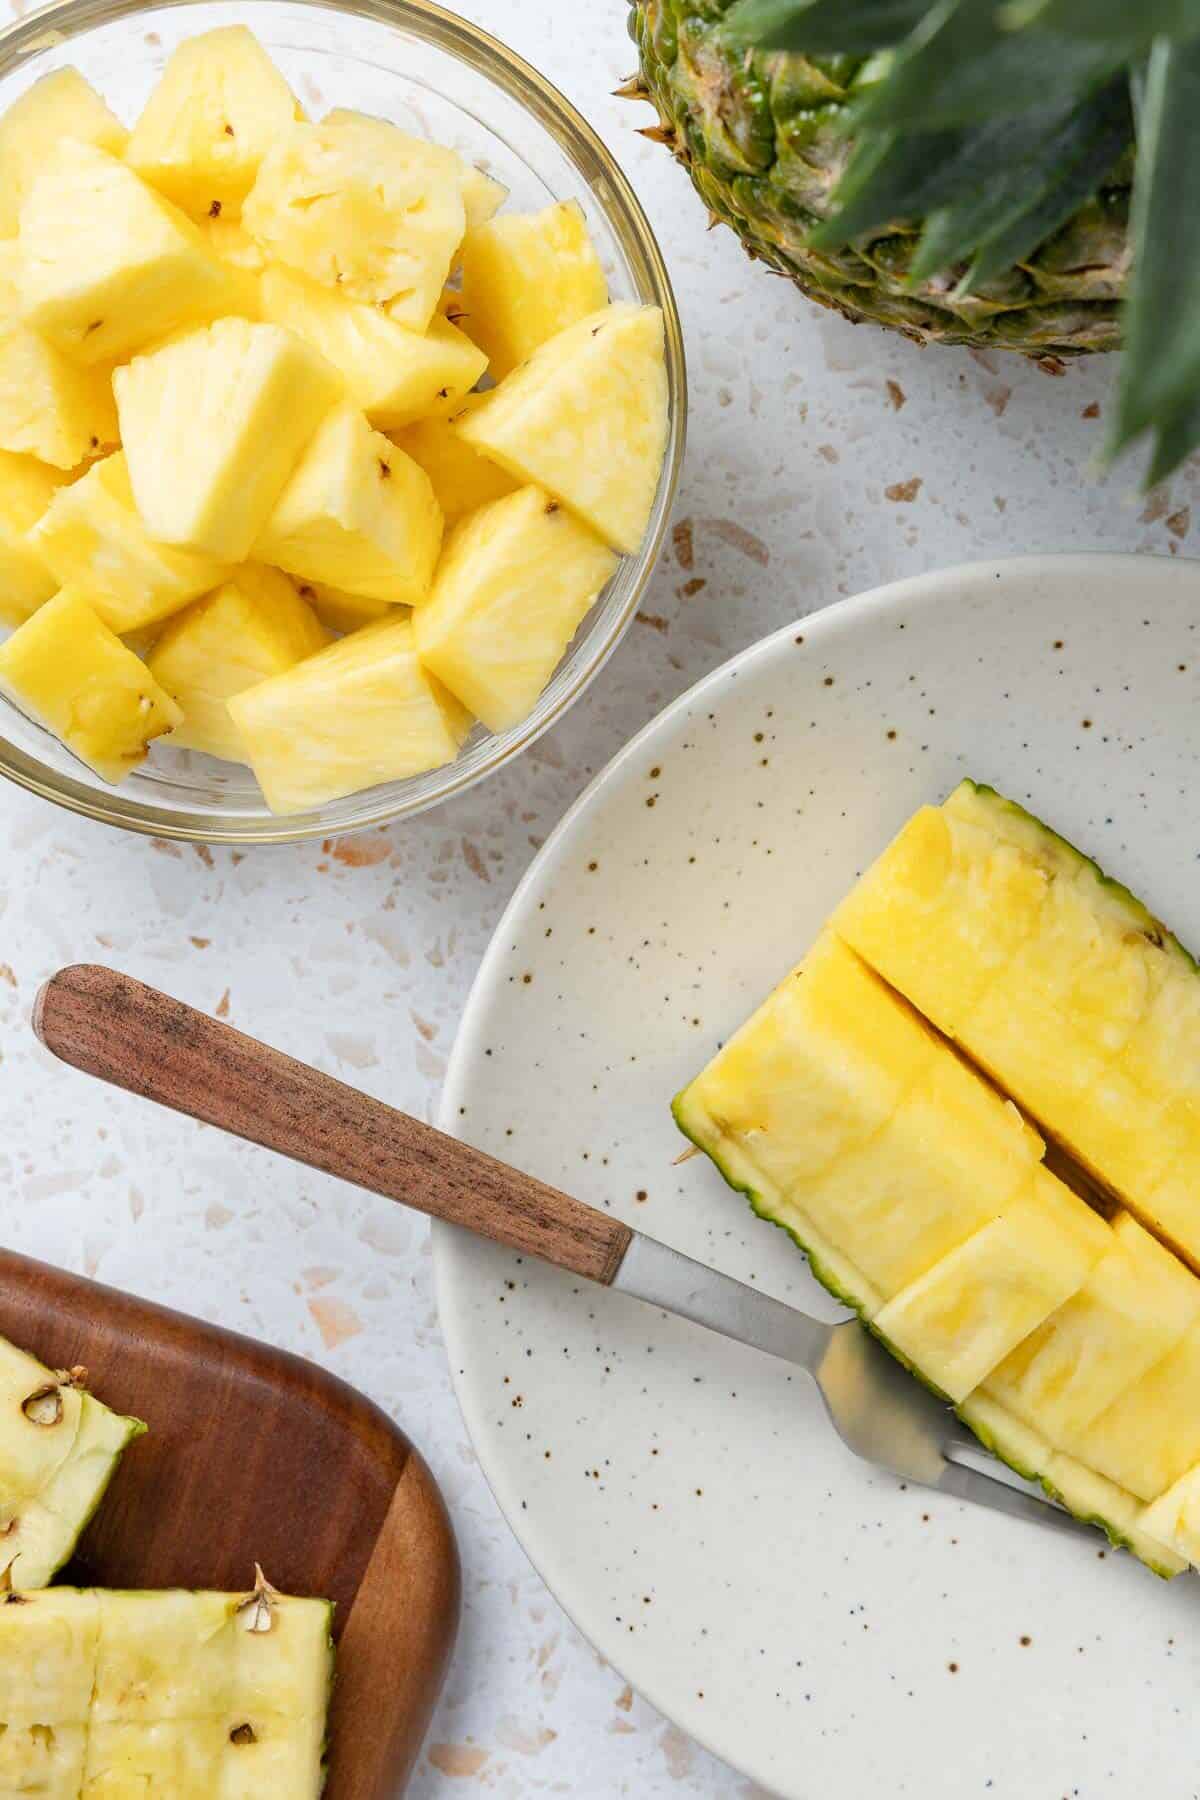 Sliced pineapple in a bowl with more sliced pineapple in a glass bowl on the side.